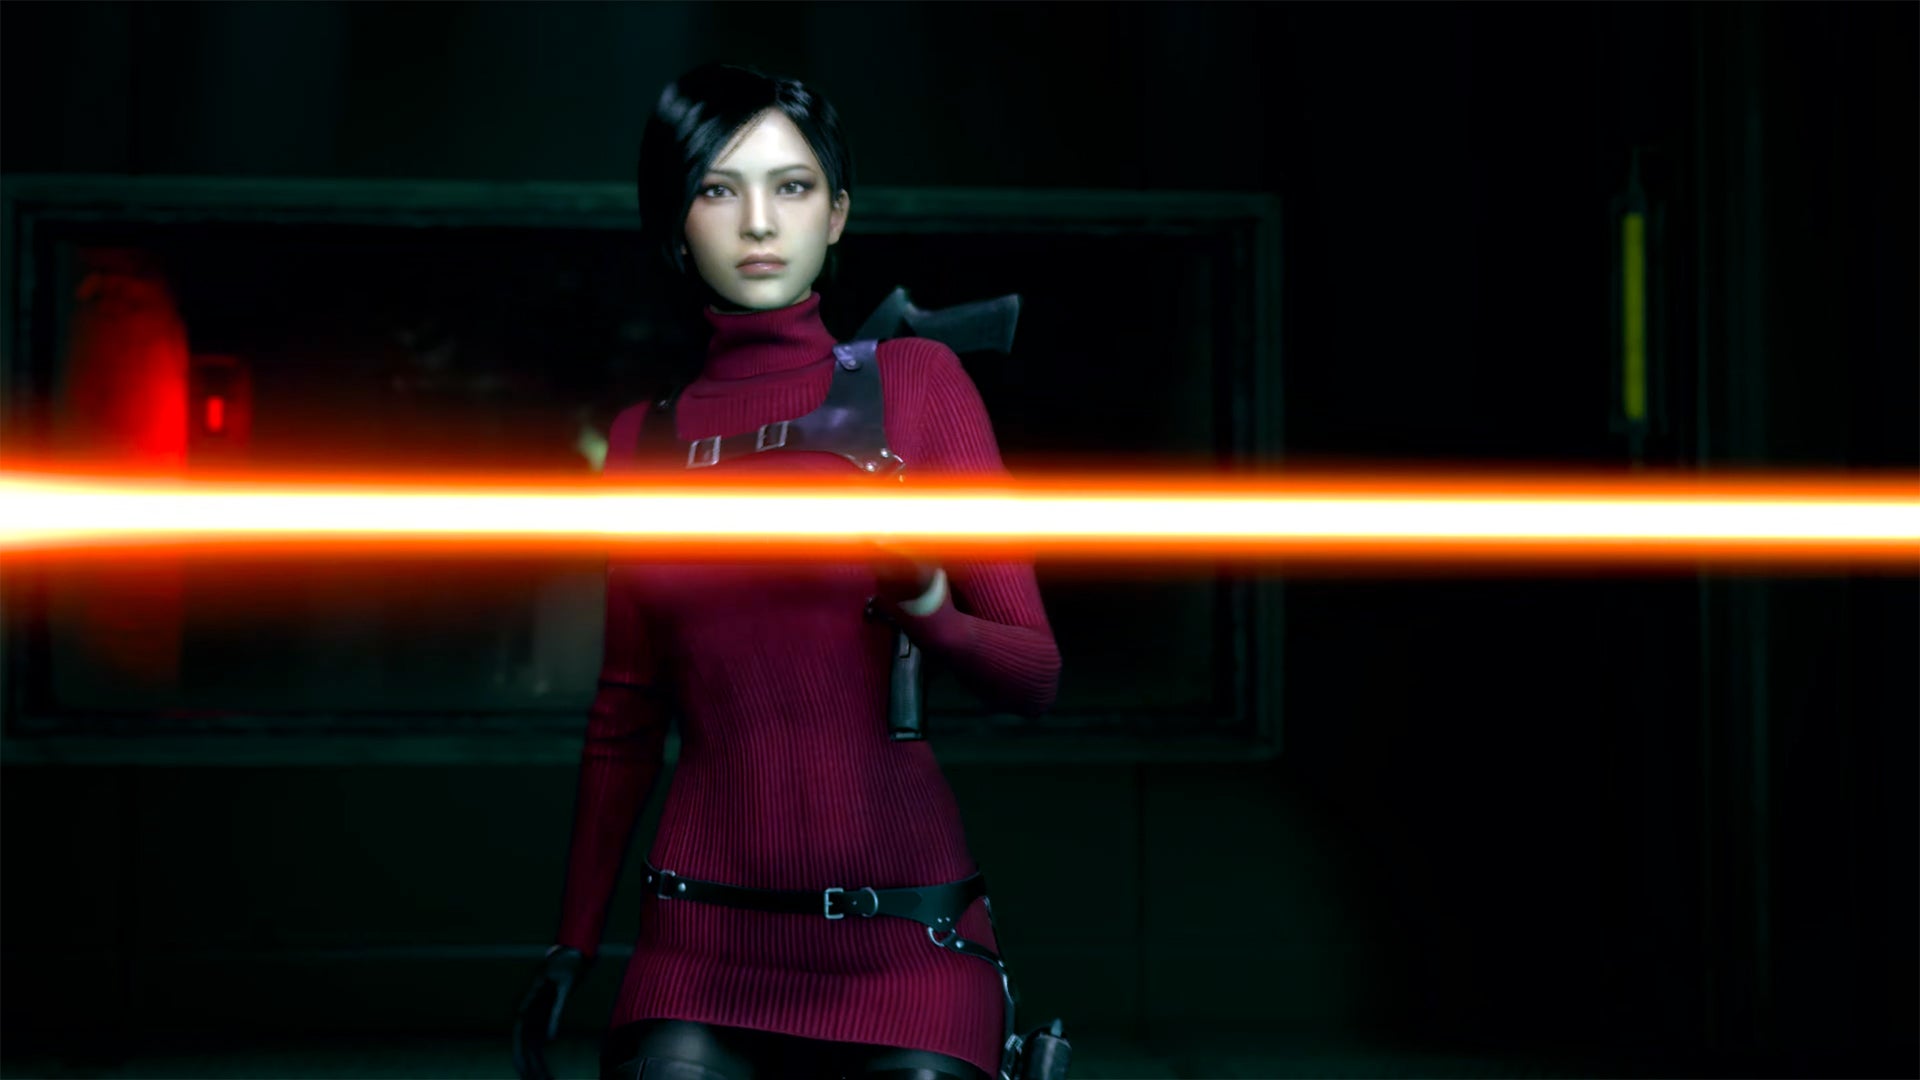 Resident Evil: 10 Things Only Fans Know About Ada Wong